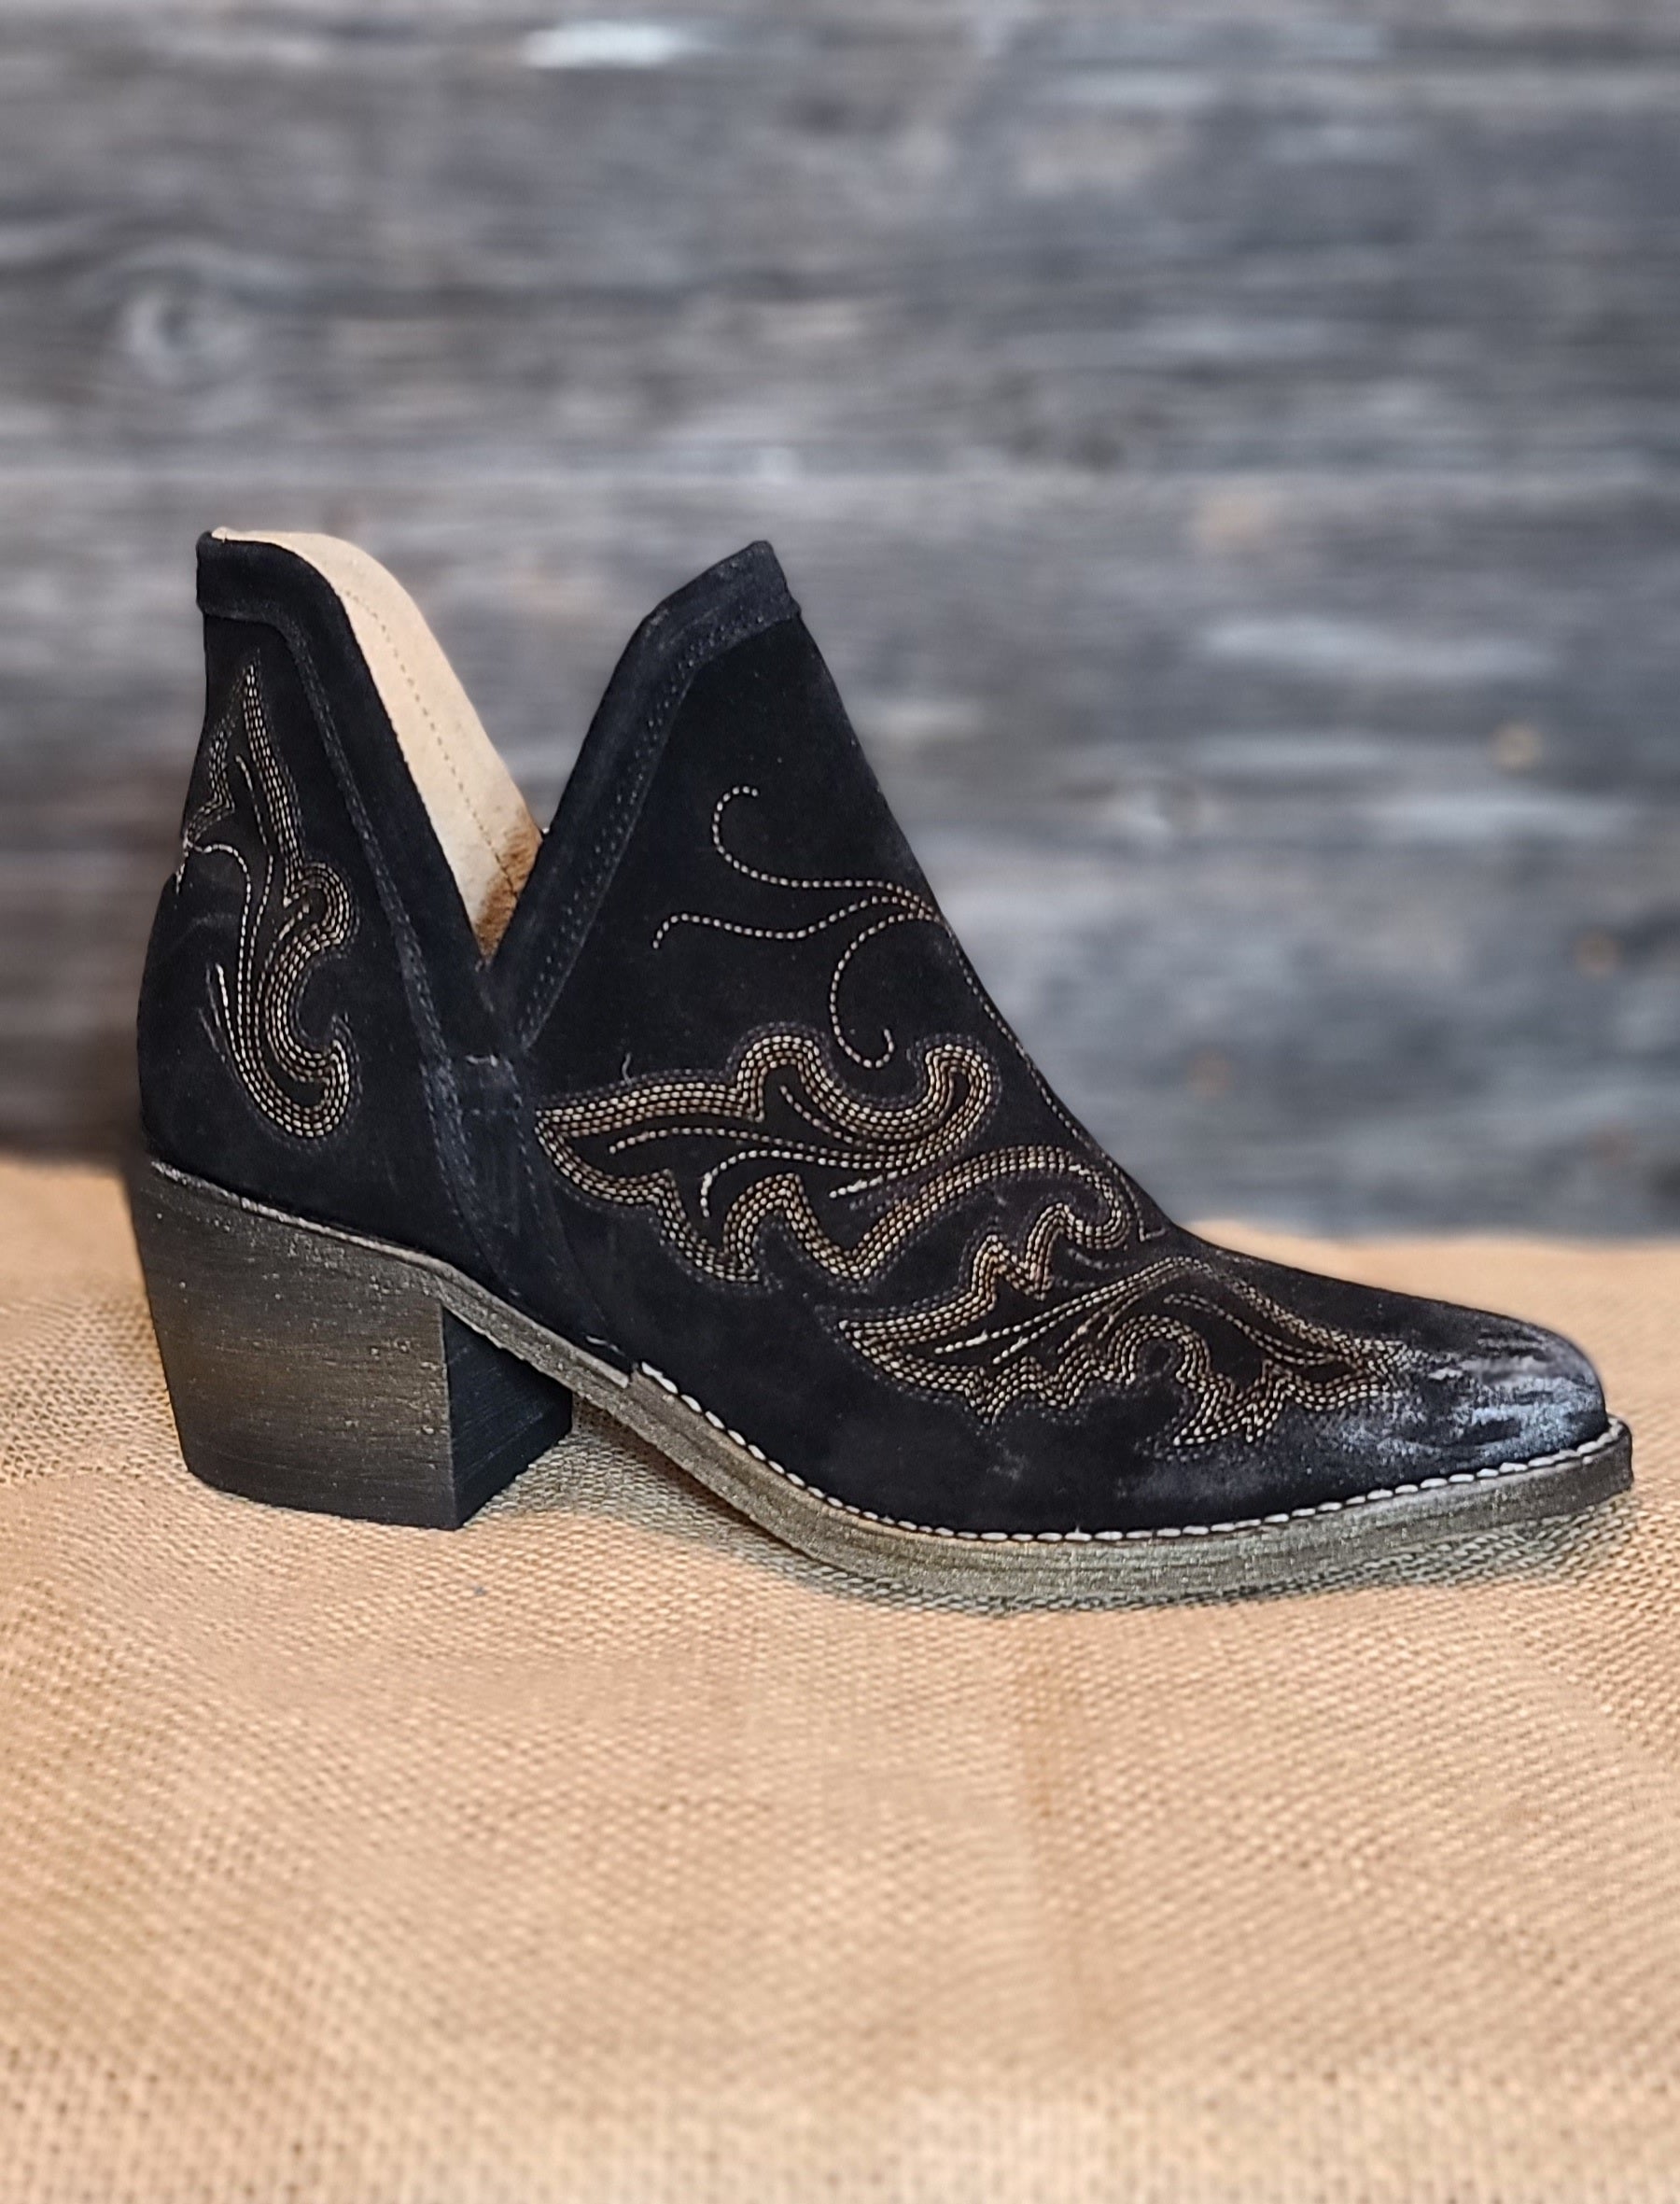 Corral Black Embroidery Shoe Boot Q0098